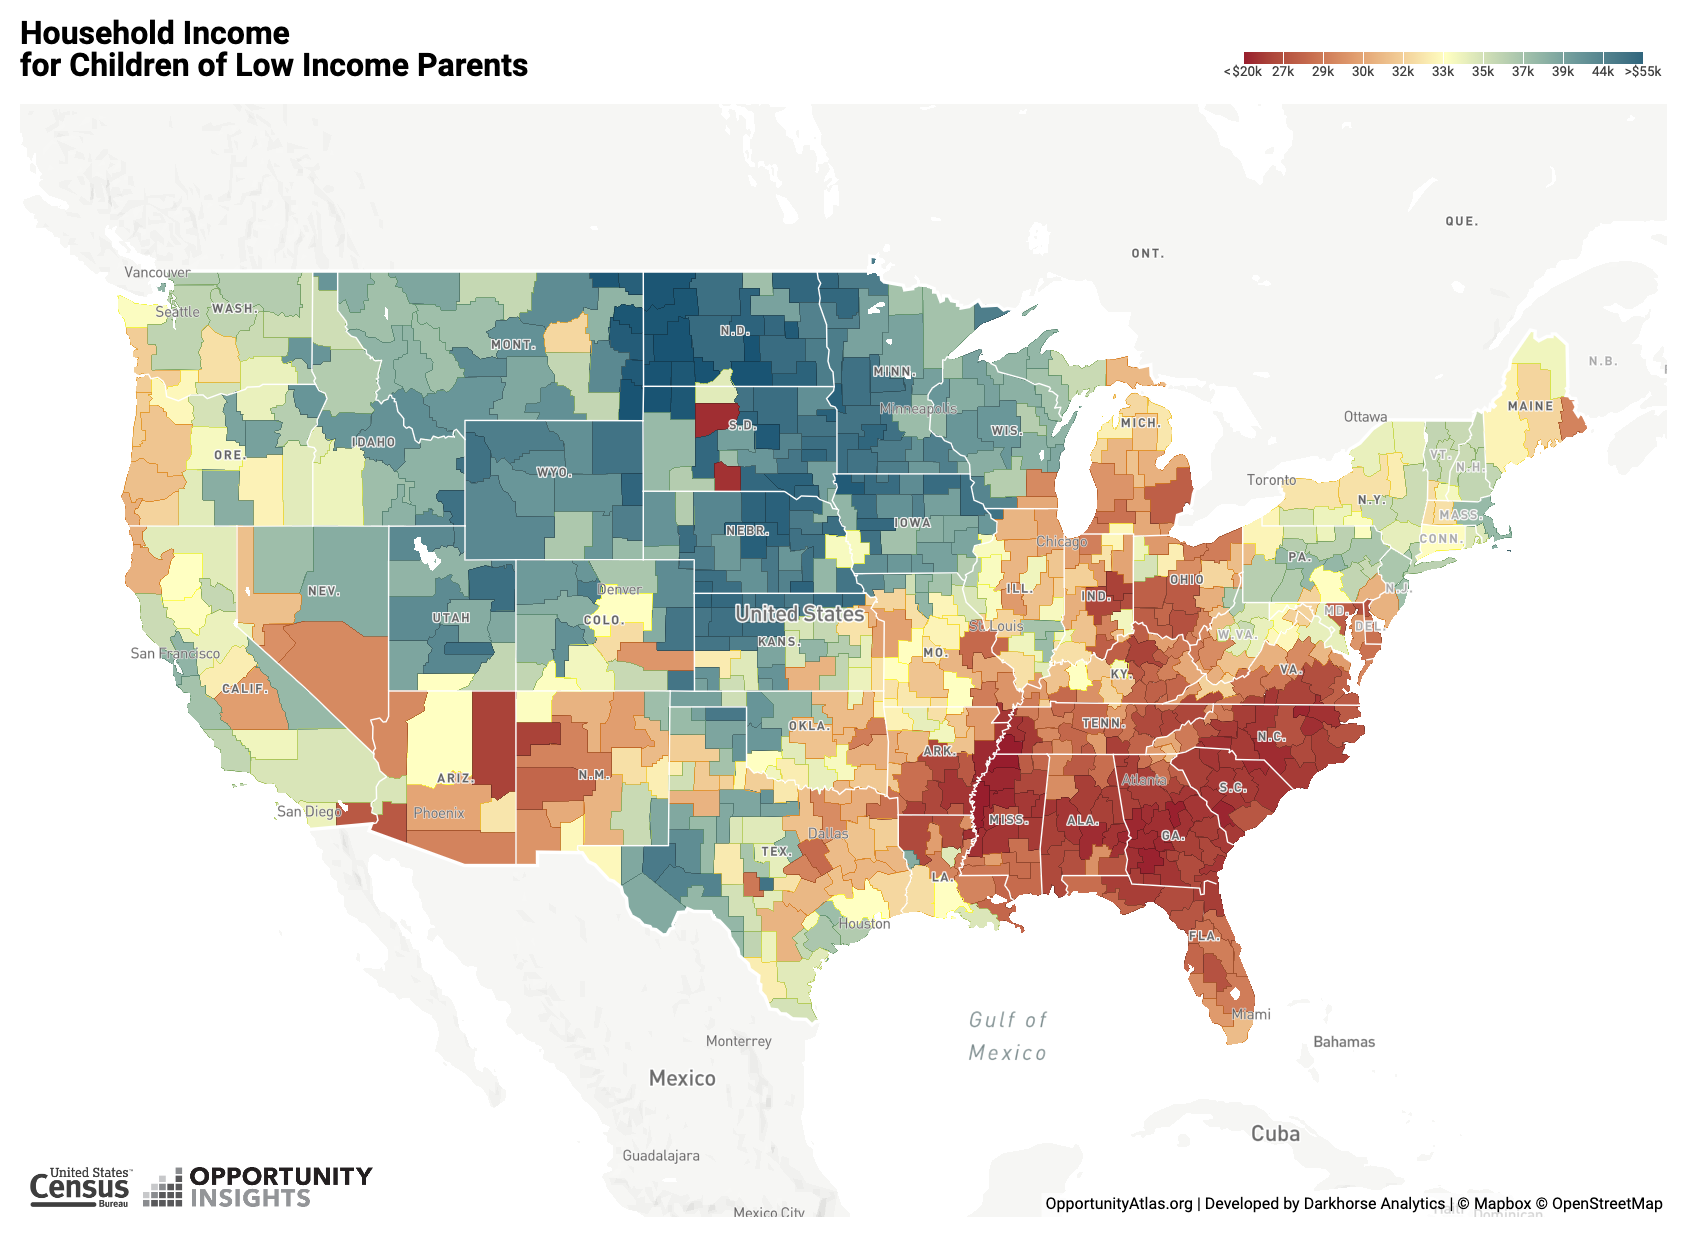 Economic opportunity for low-income children is lowest in the Southeast and highest in the Plains region.